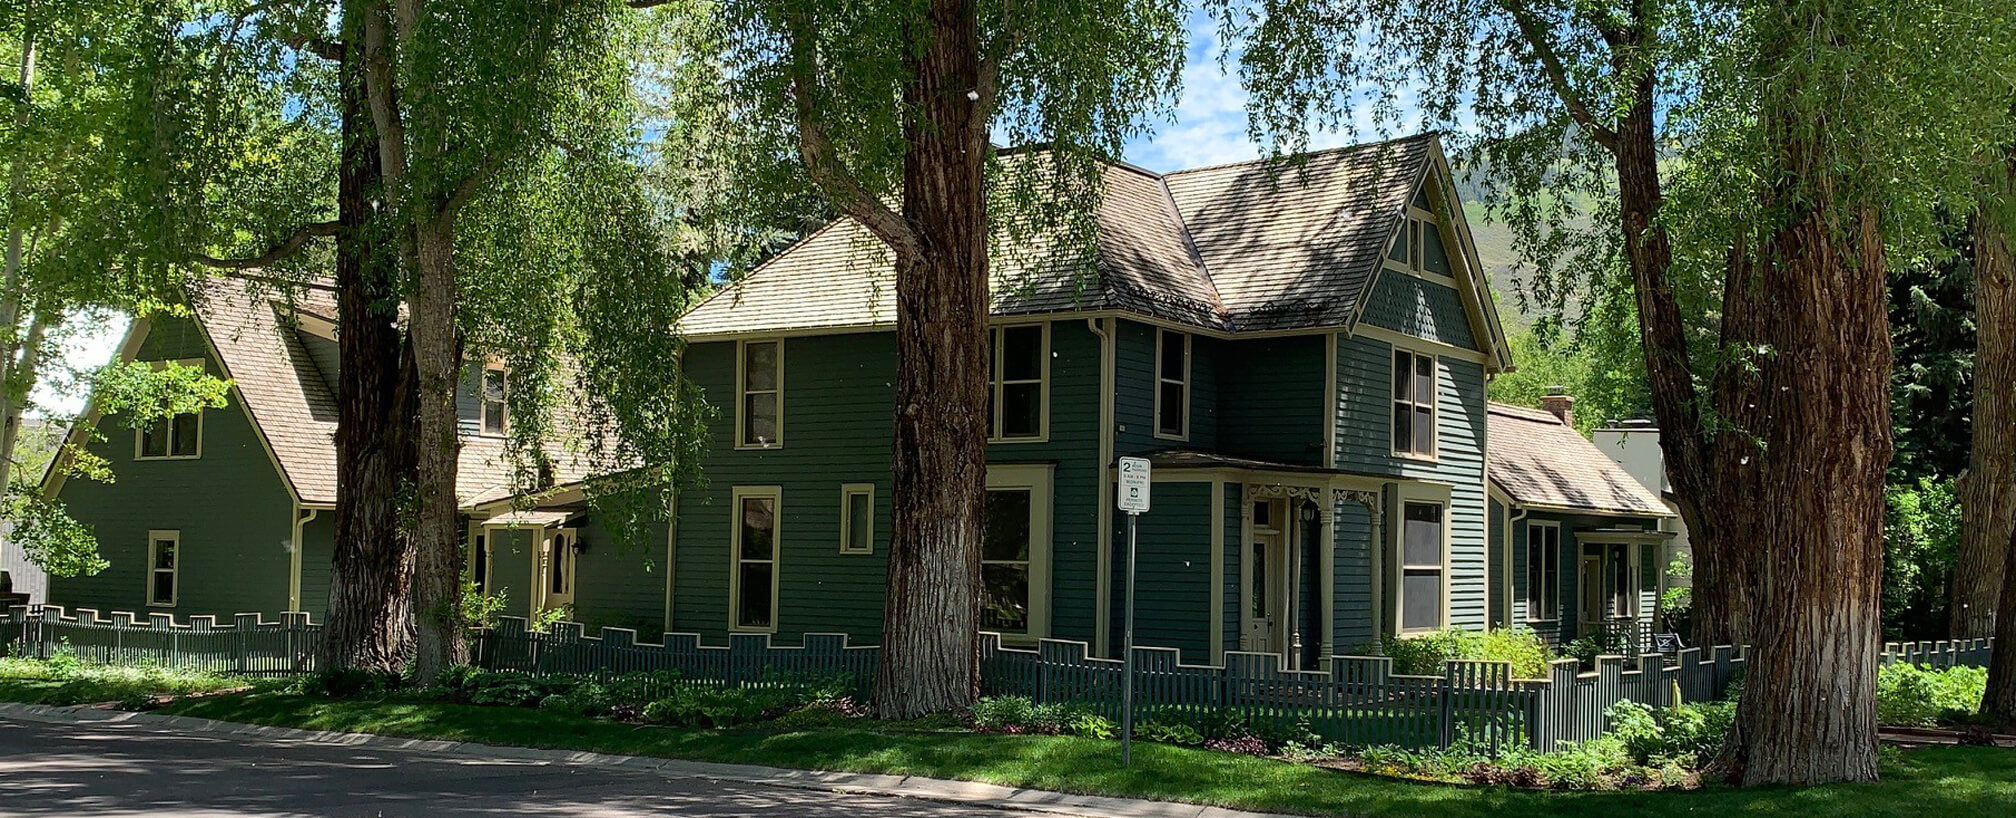 Historic West End Aspen Home at 234 W Francis Sells at $15M and a WE Record $3,669 Sq Ft Image